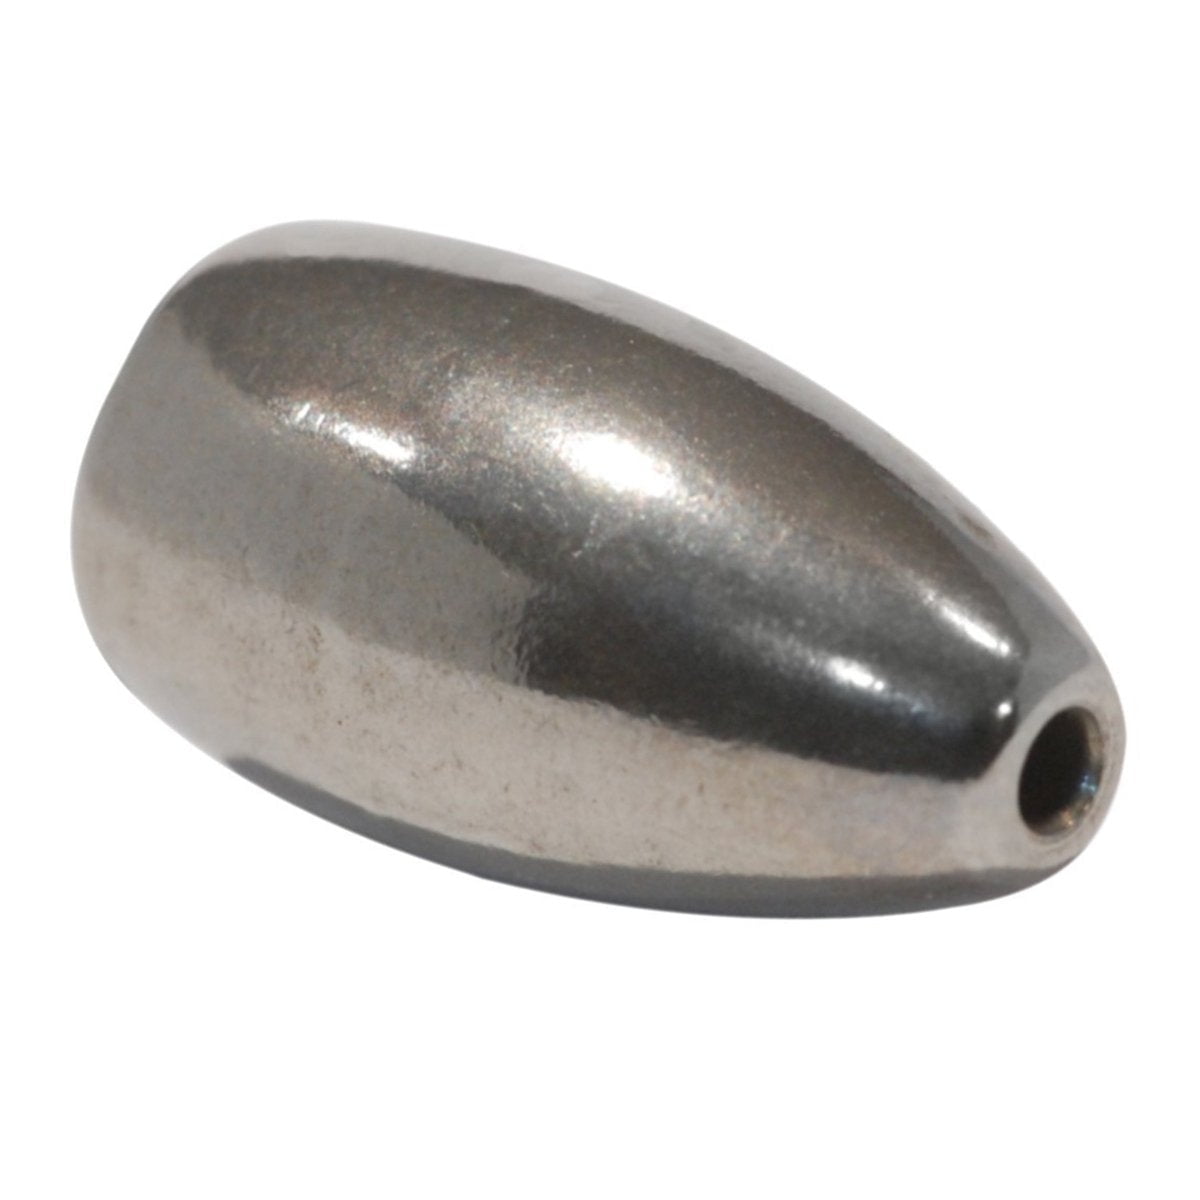 Fishing Weights and Sinkers used in Wisconsin